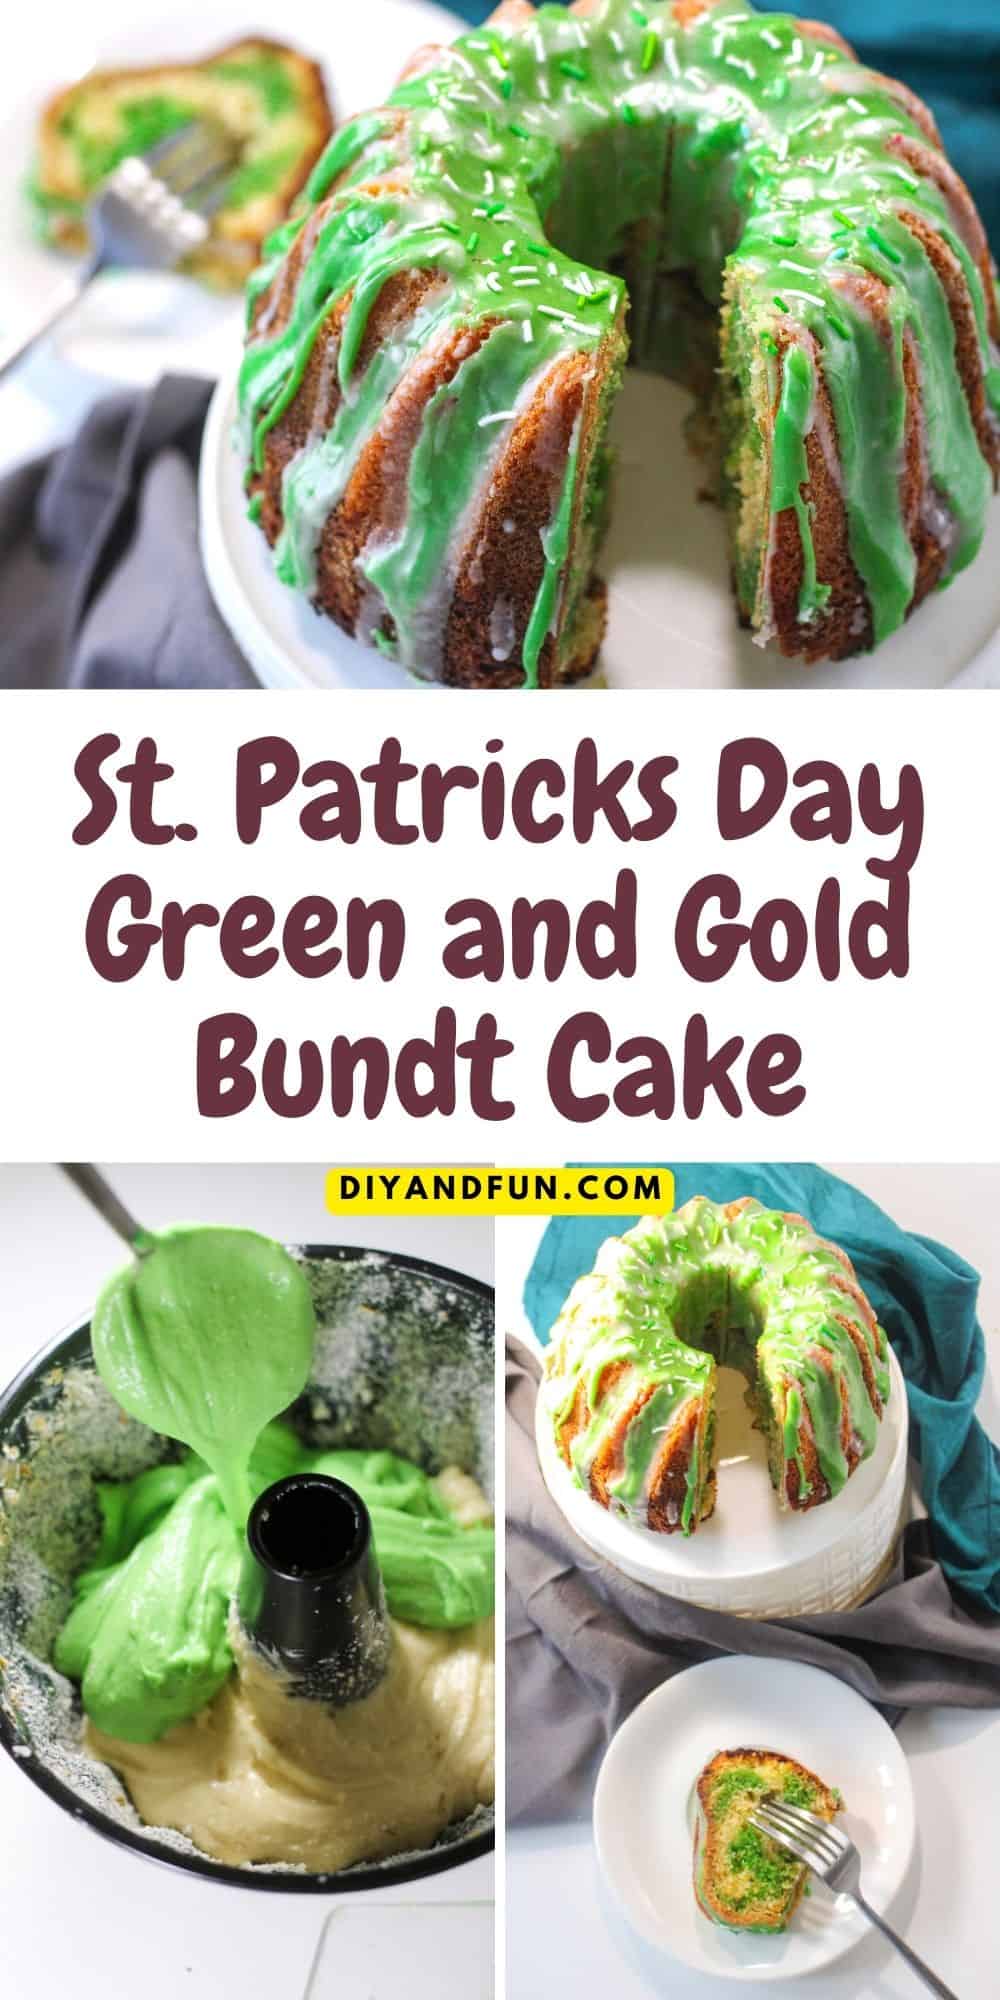 St. Patricks Day Green and Gold Bundt Cake,  a simple and tasty recipe using cake mix for a green and gold cake with green and white icing.